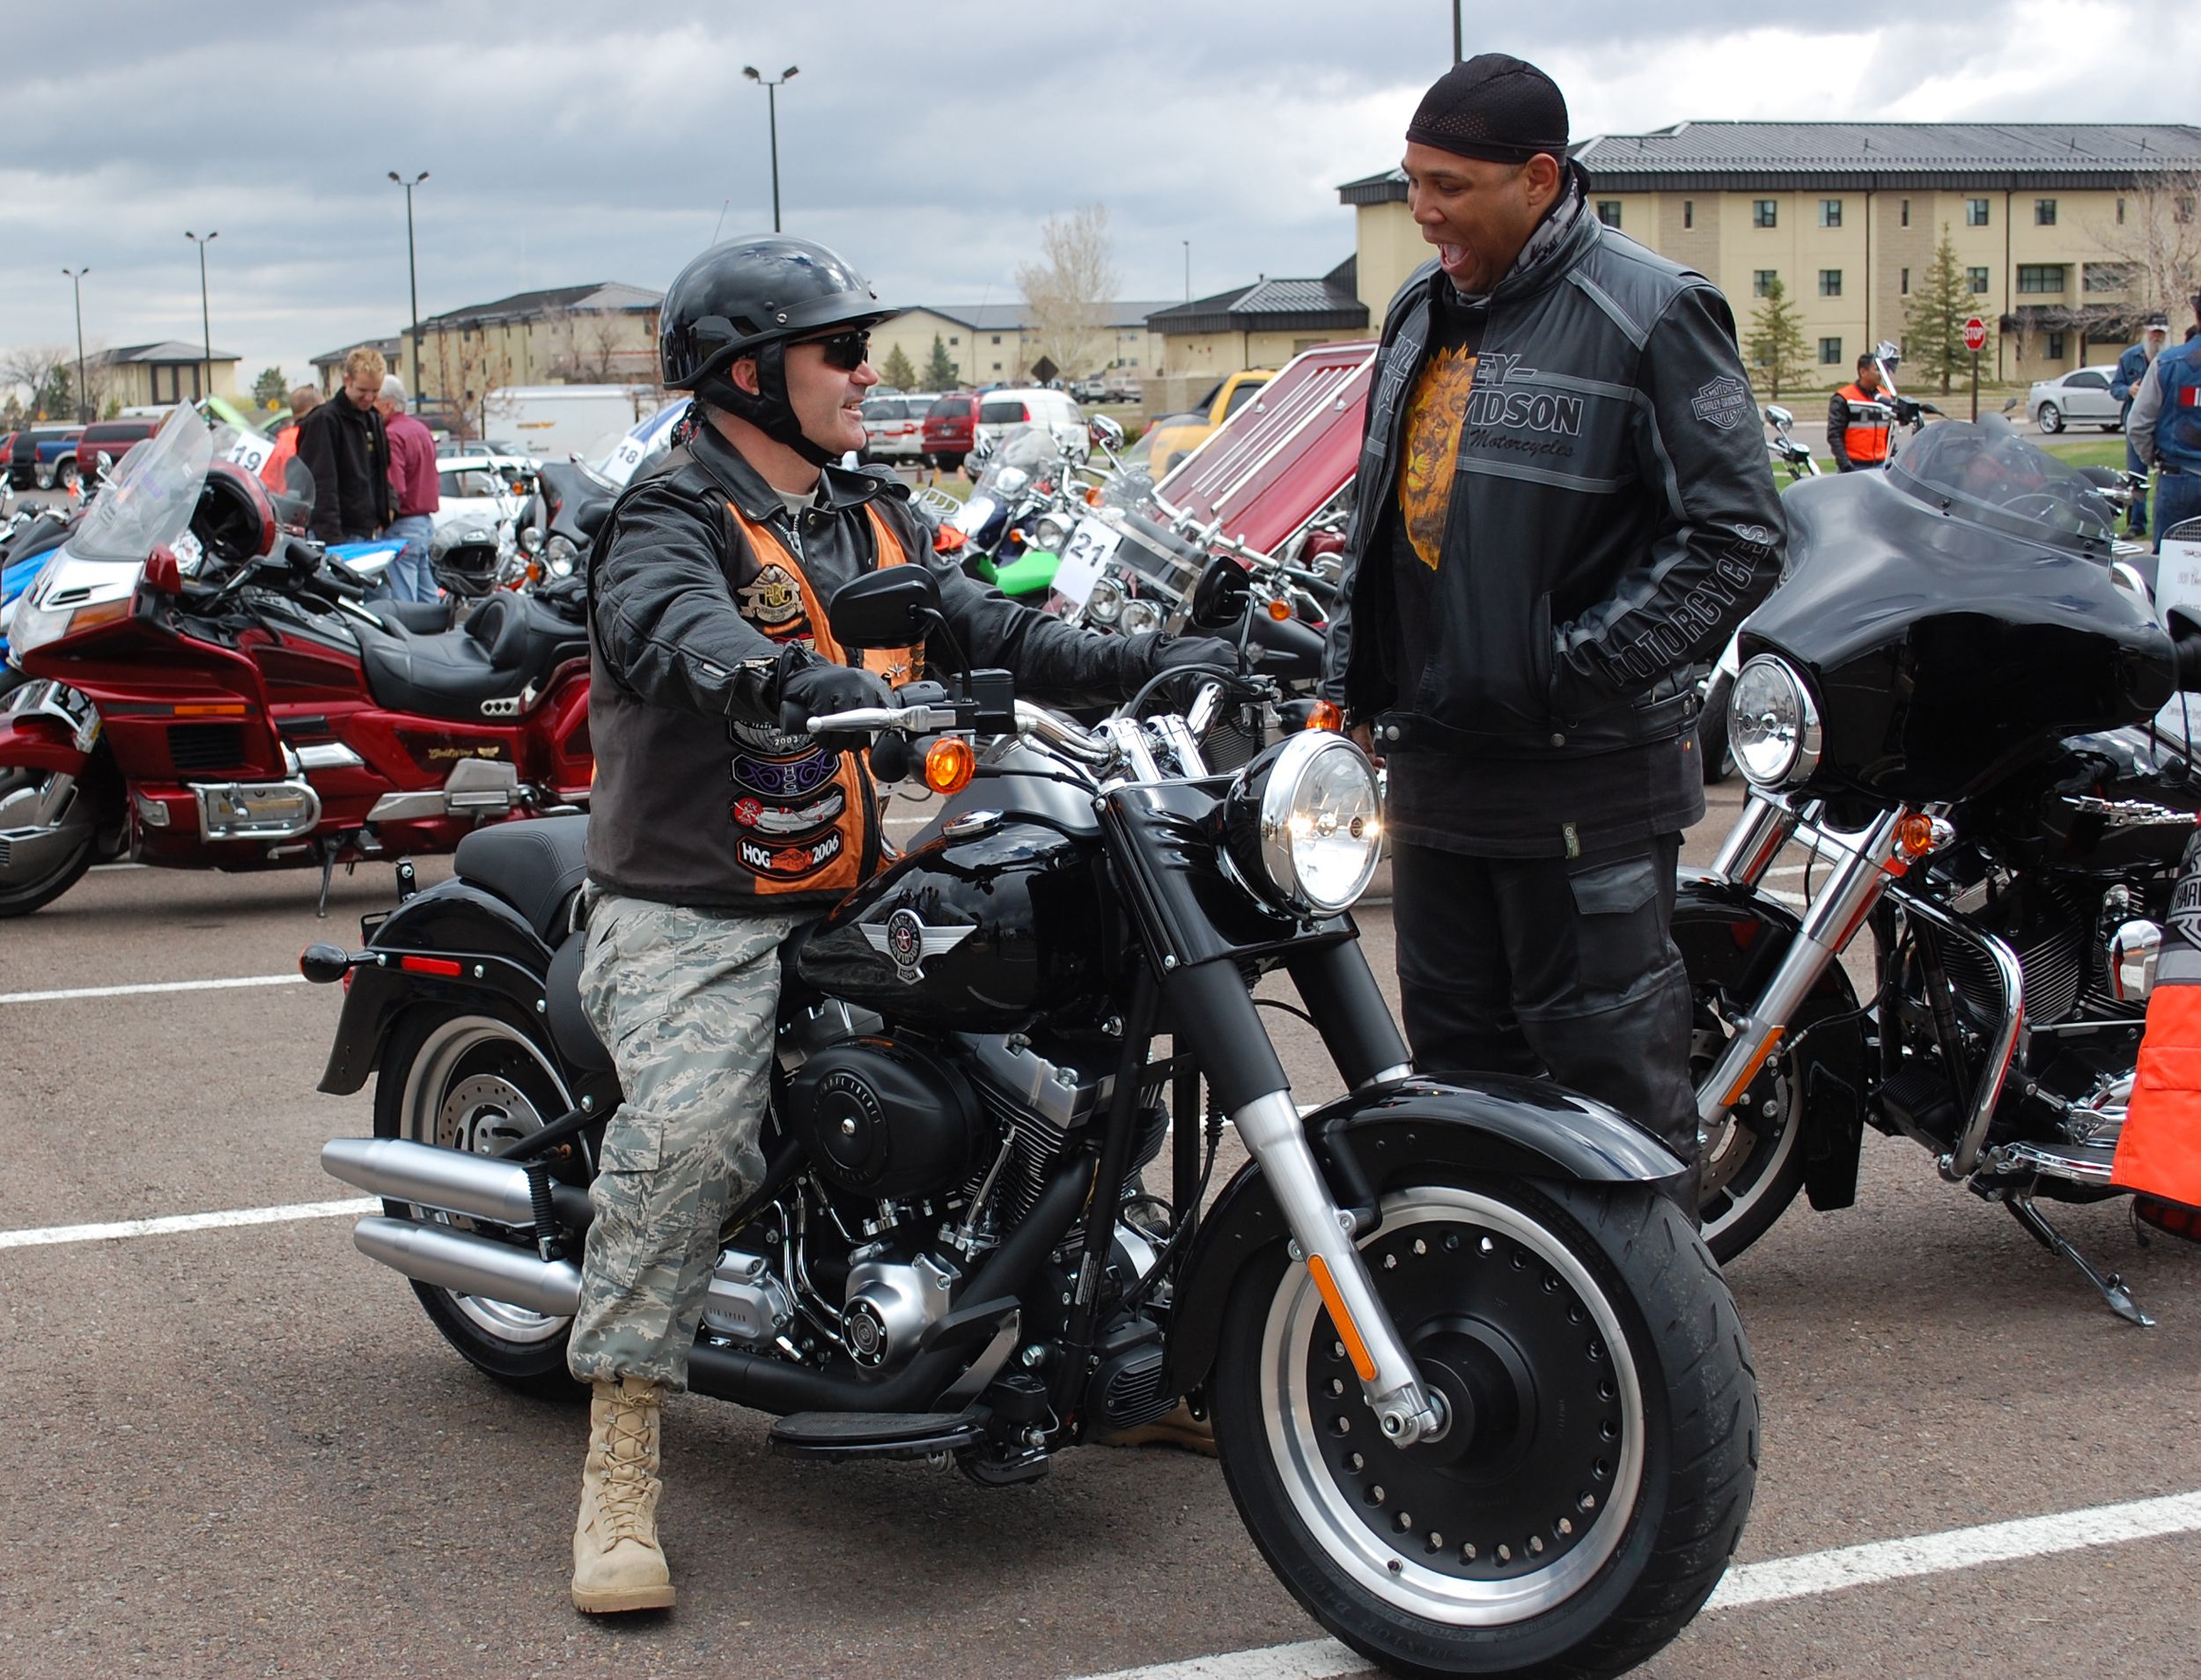 Two Harley Riders Chatting